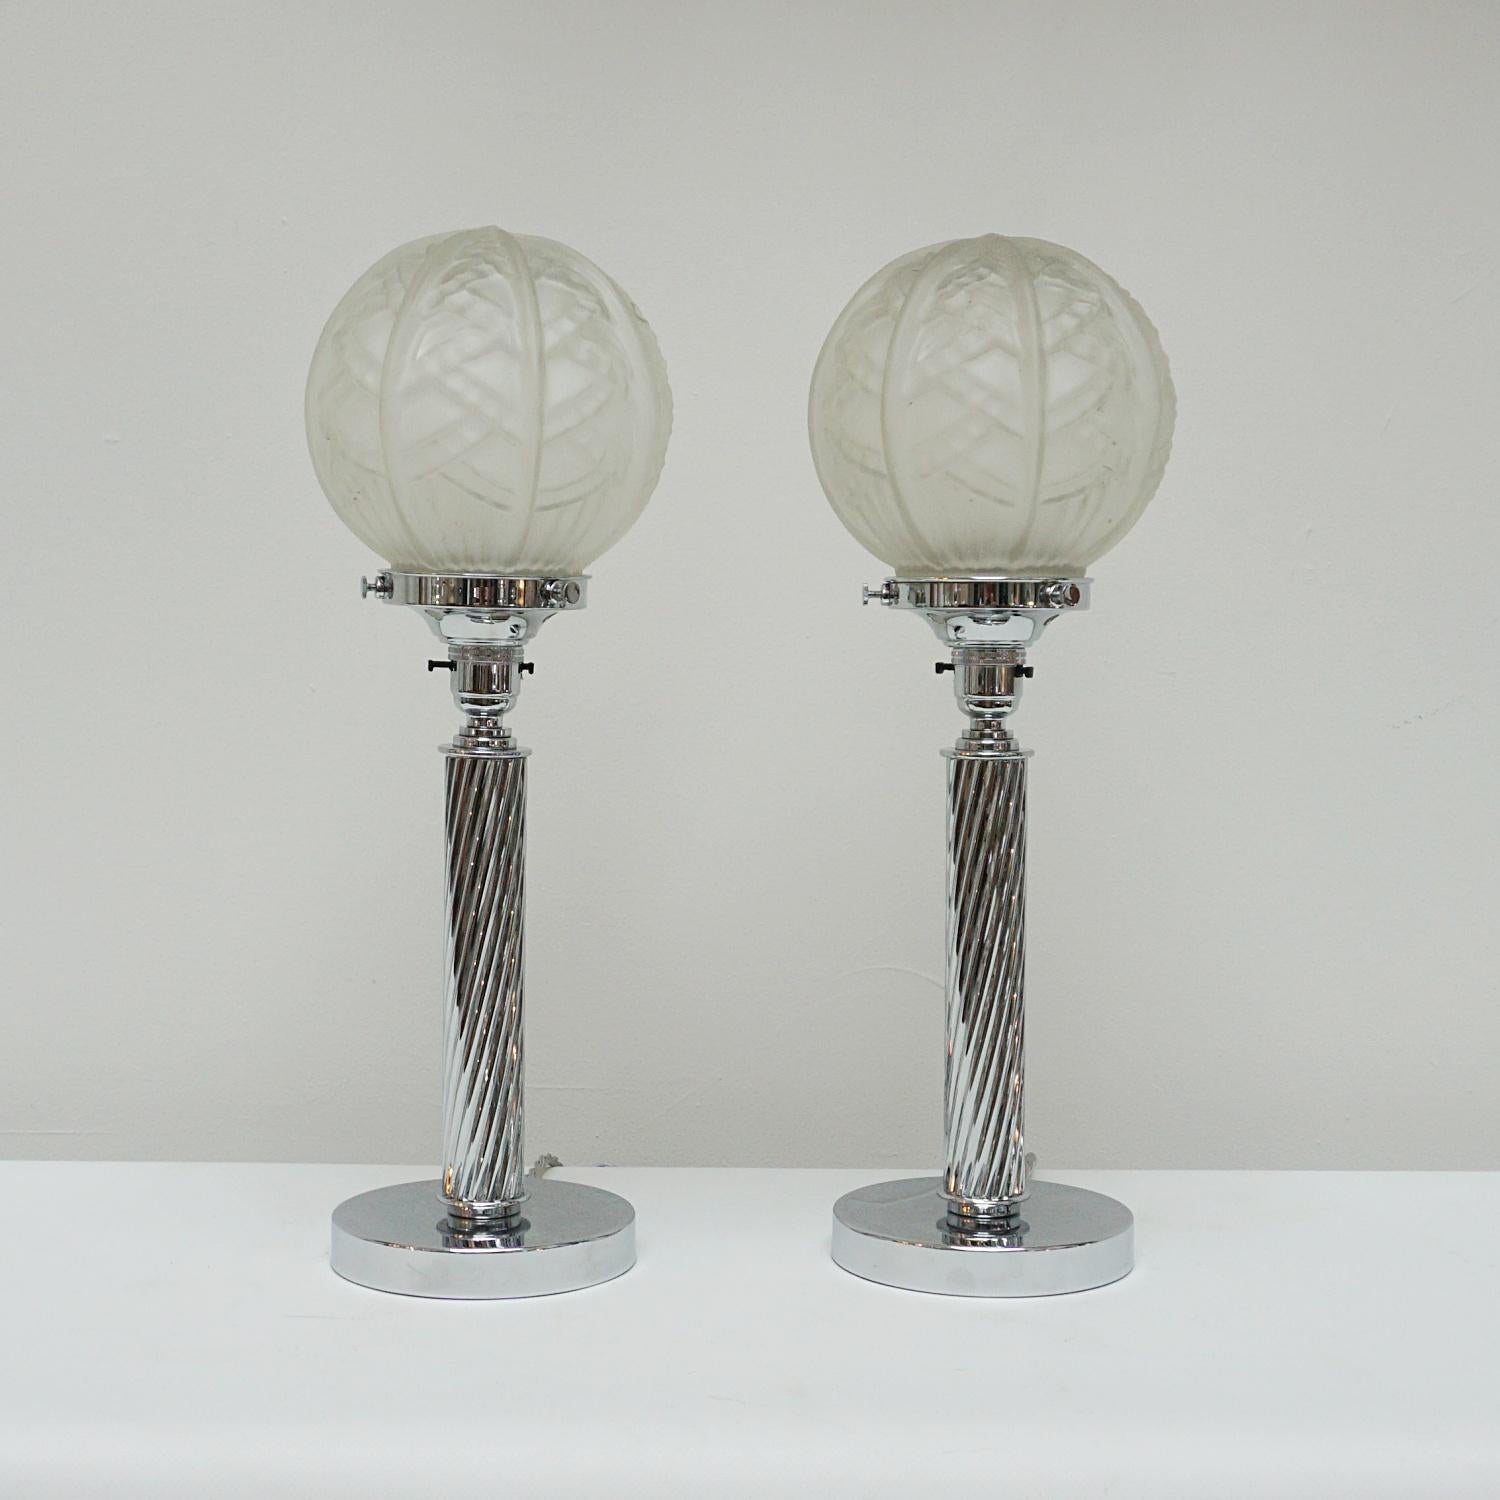 A pair of Art Deco table lamps. Finely spiralled chrome column stem, set over stepped circular base. Segmented frosted glass shades shades. 

Dimensions: H 49cm 

Origin: English

Item Number: J291

All of our lighting is fully refurbished,